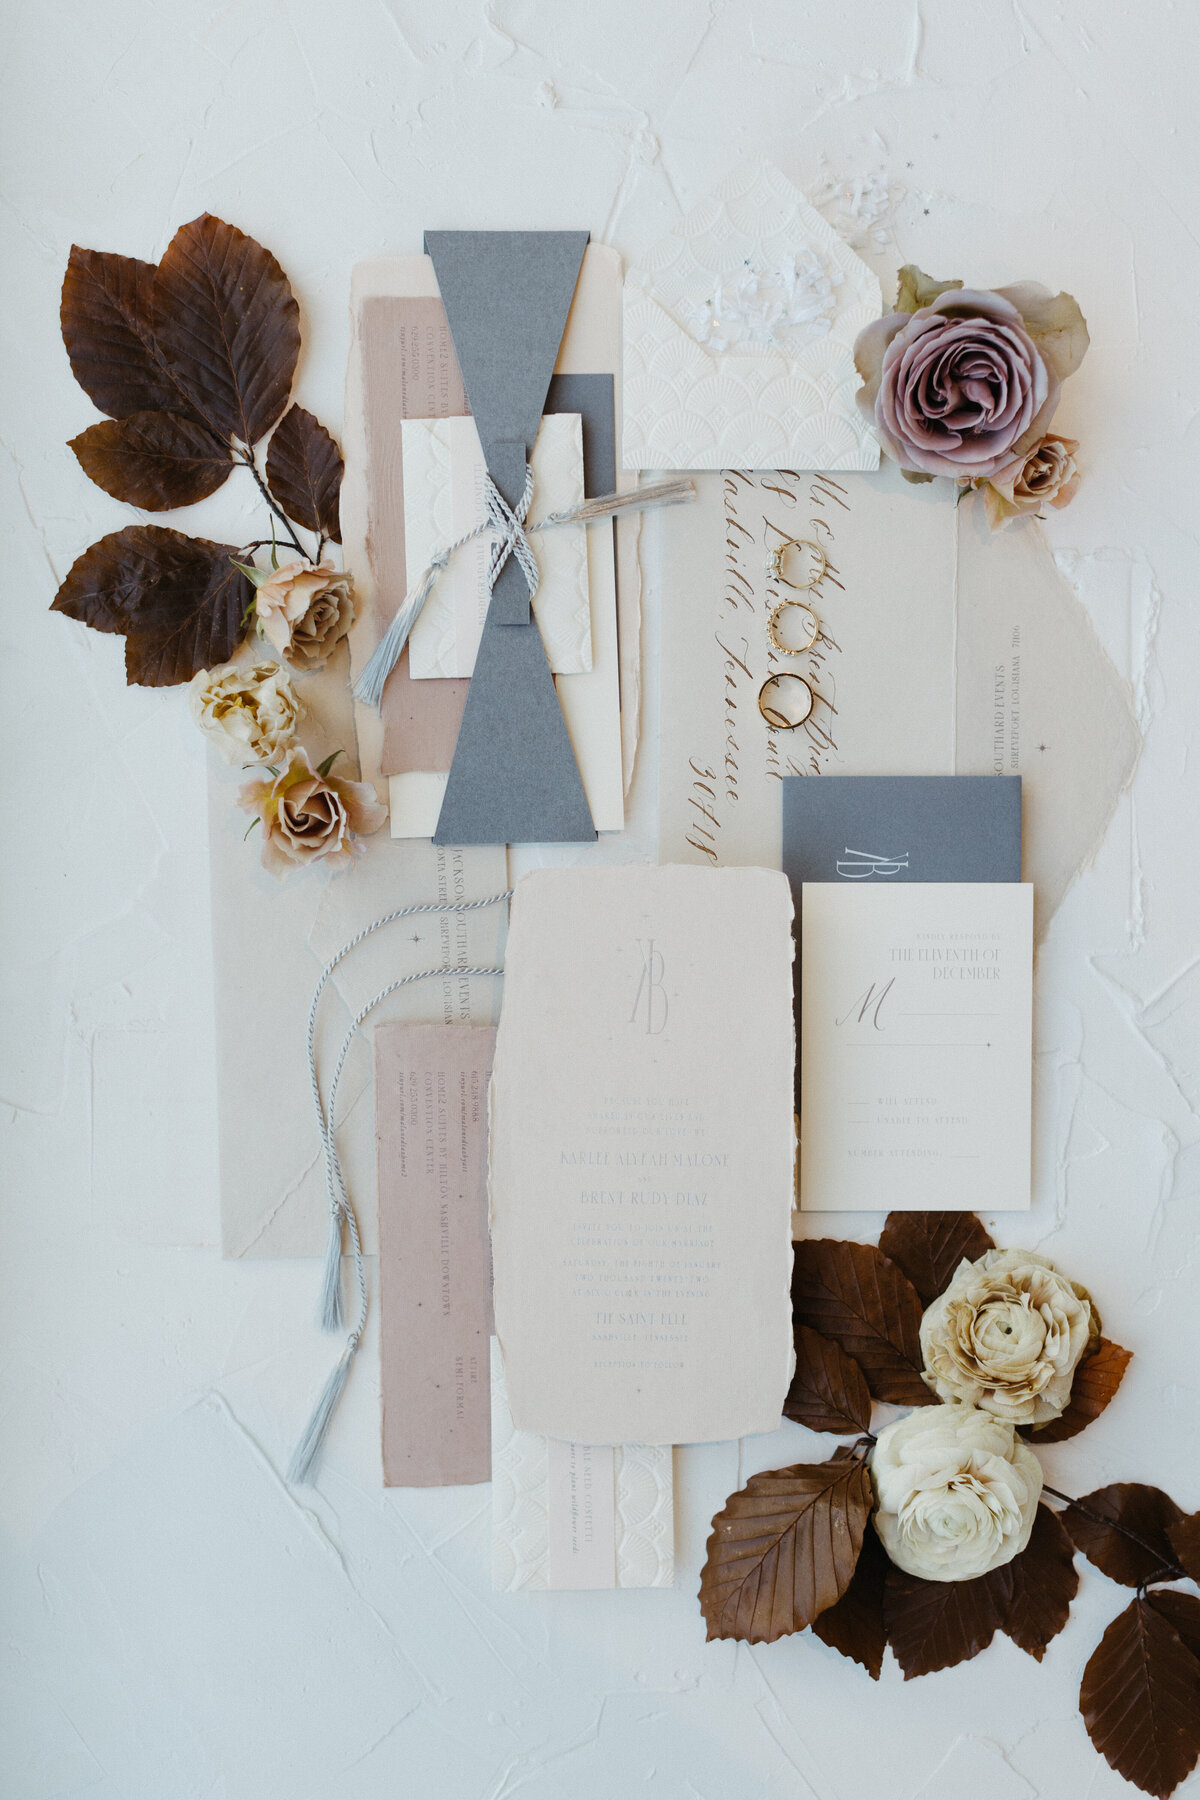 Art deco 1920s, gatsby inspired wedding with hues of terra cotta, dusty pink, mauve, and burgundy. Lush roses, ranunculus, and copper beech highlight the florals. Designed by Rosemary and Finch in Nashville, TN.